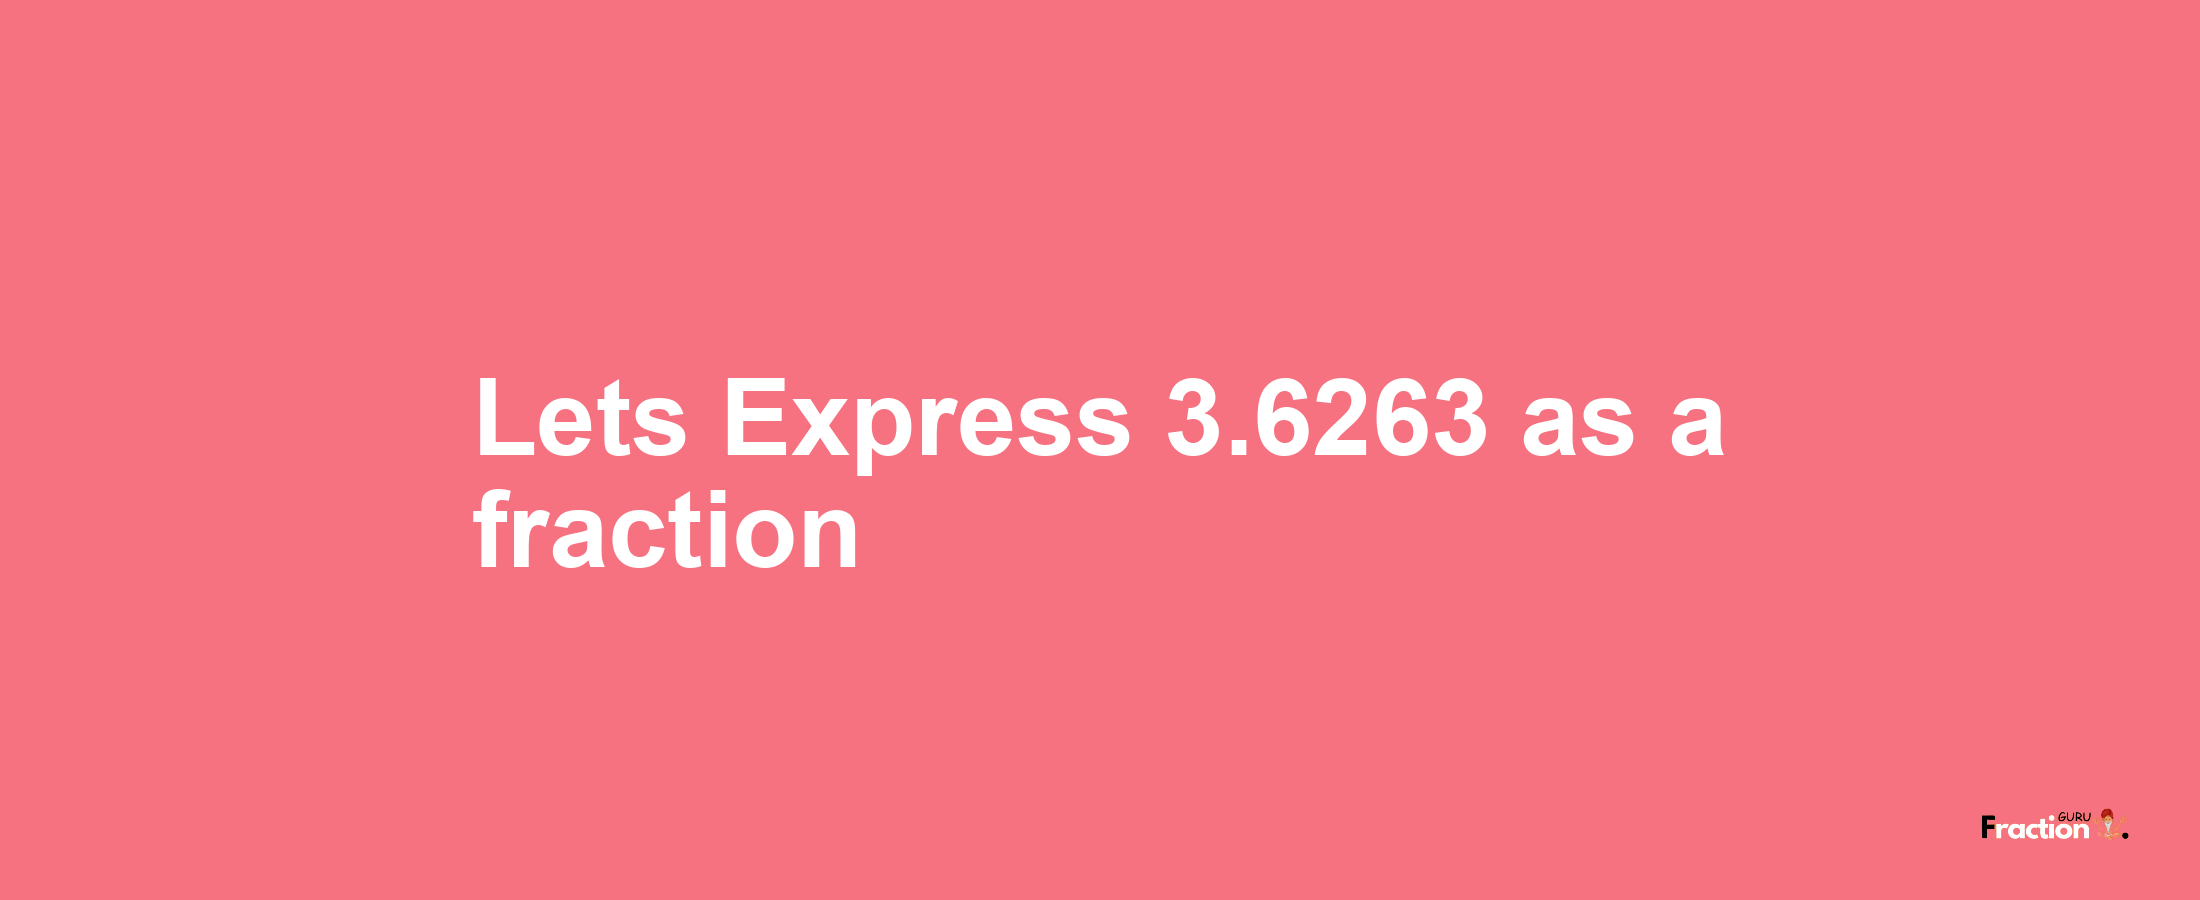 Lets Express 3.6263 as afraction